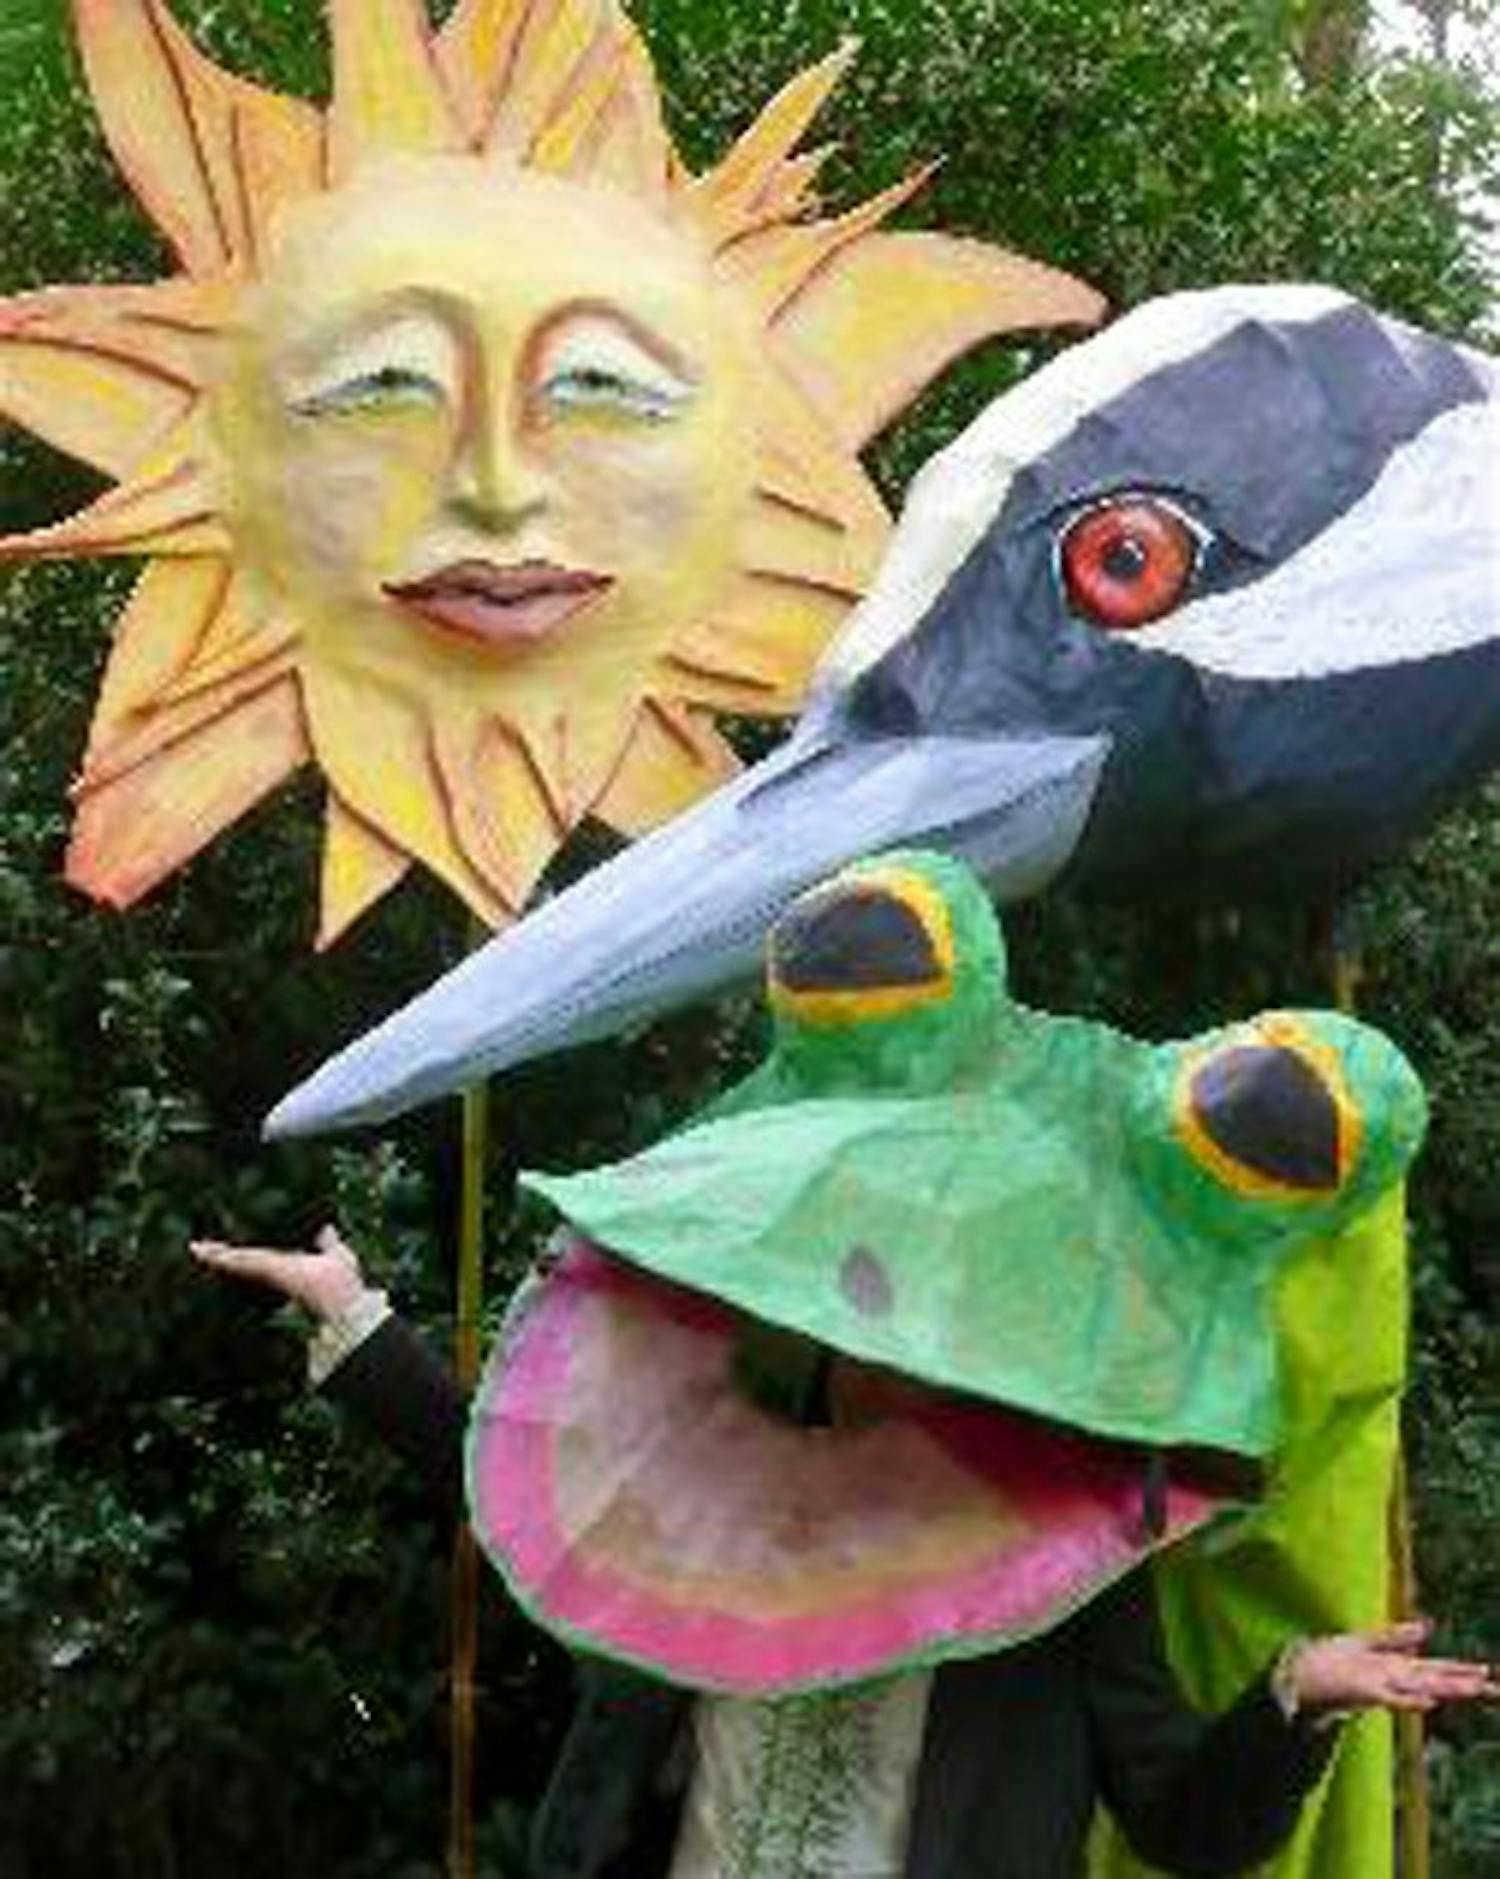 The annual Handmade Parade will take place this Saturday afternoon. The puppets in the parade have steadily gotten larger every year. 

Courtesy of the Hillsborough Arts Council.  